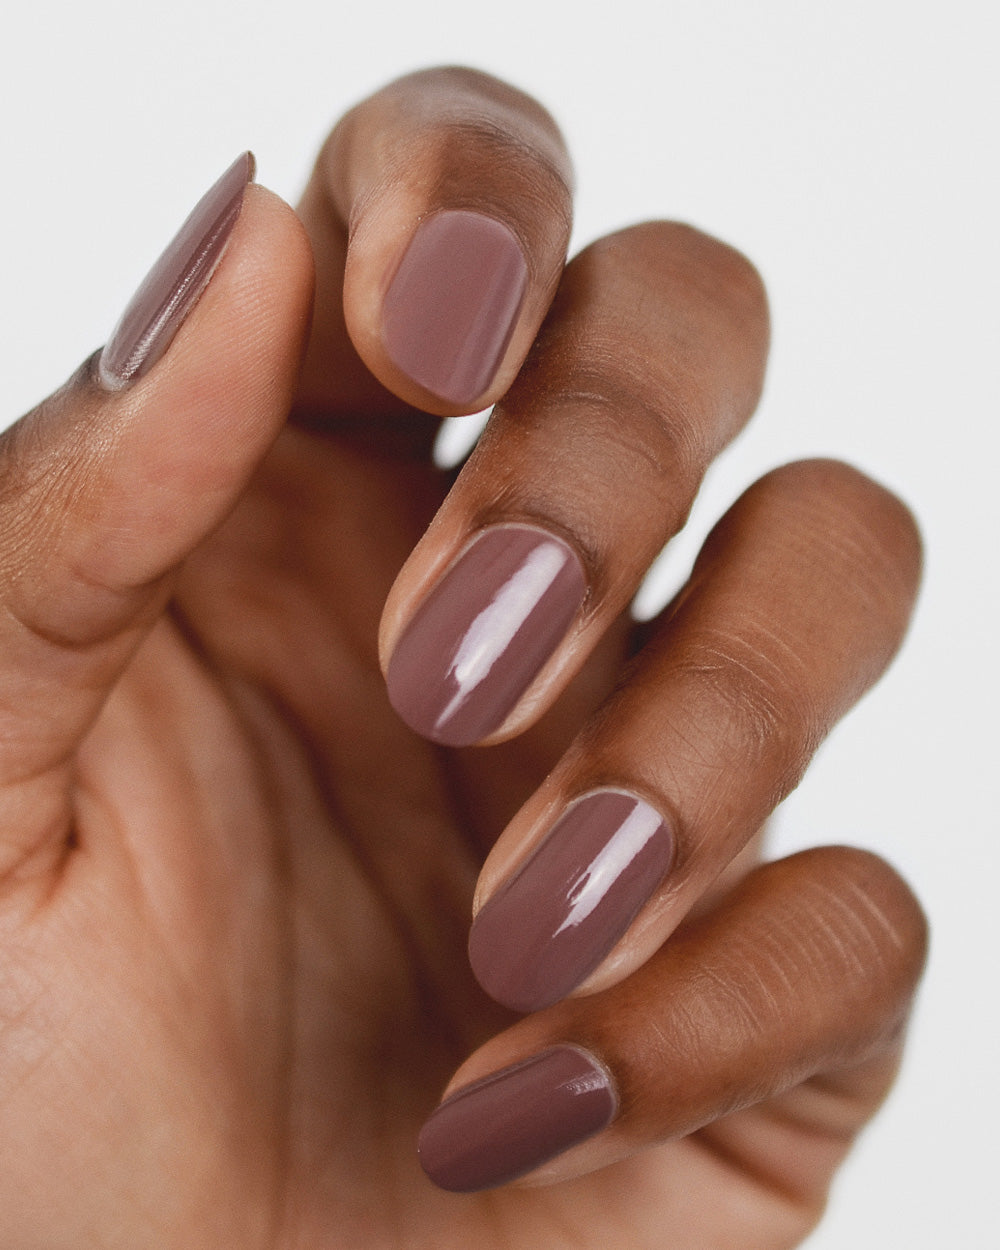 Medium tanned skin hand wearing Grounded mylk chocolate crème nail polish by Sienna Byron Bay close-up